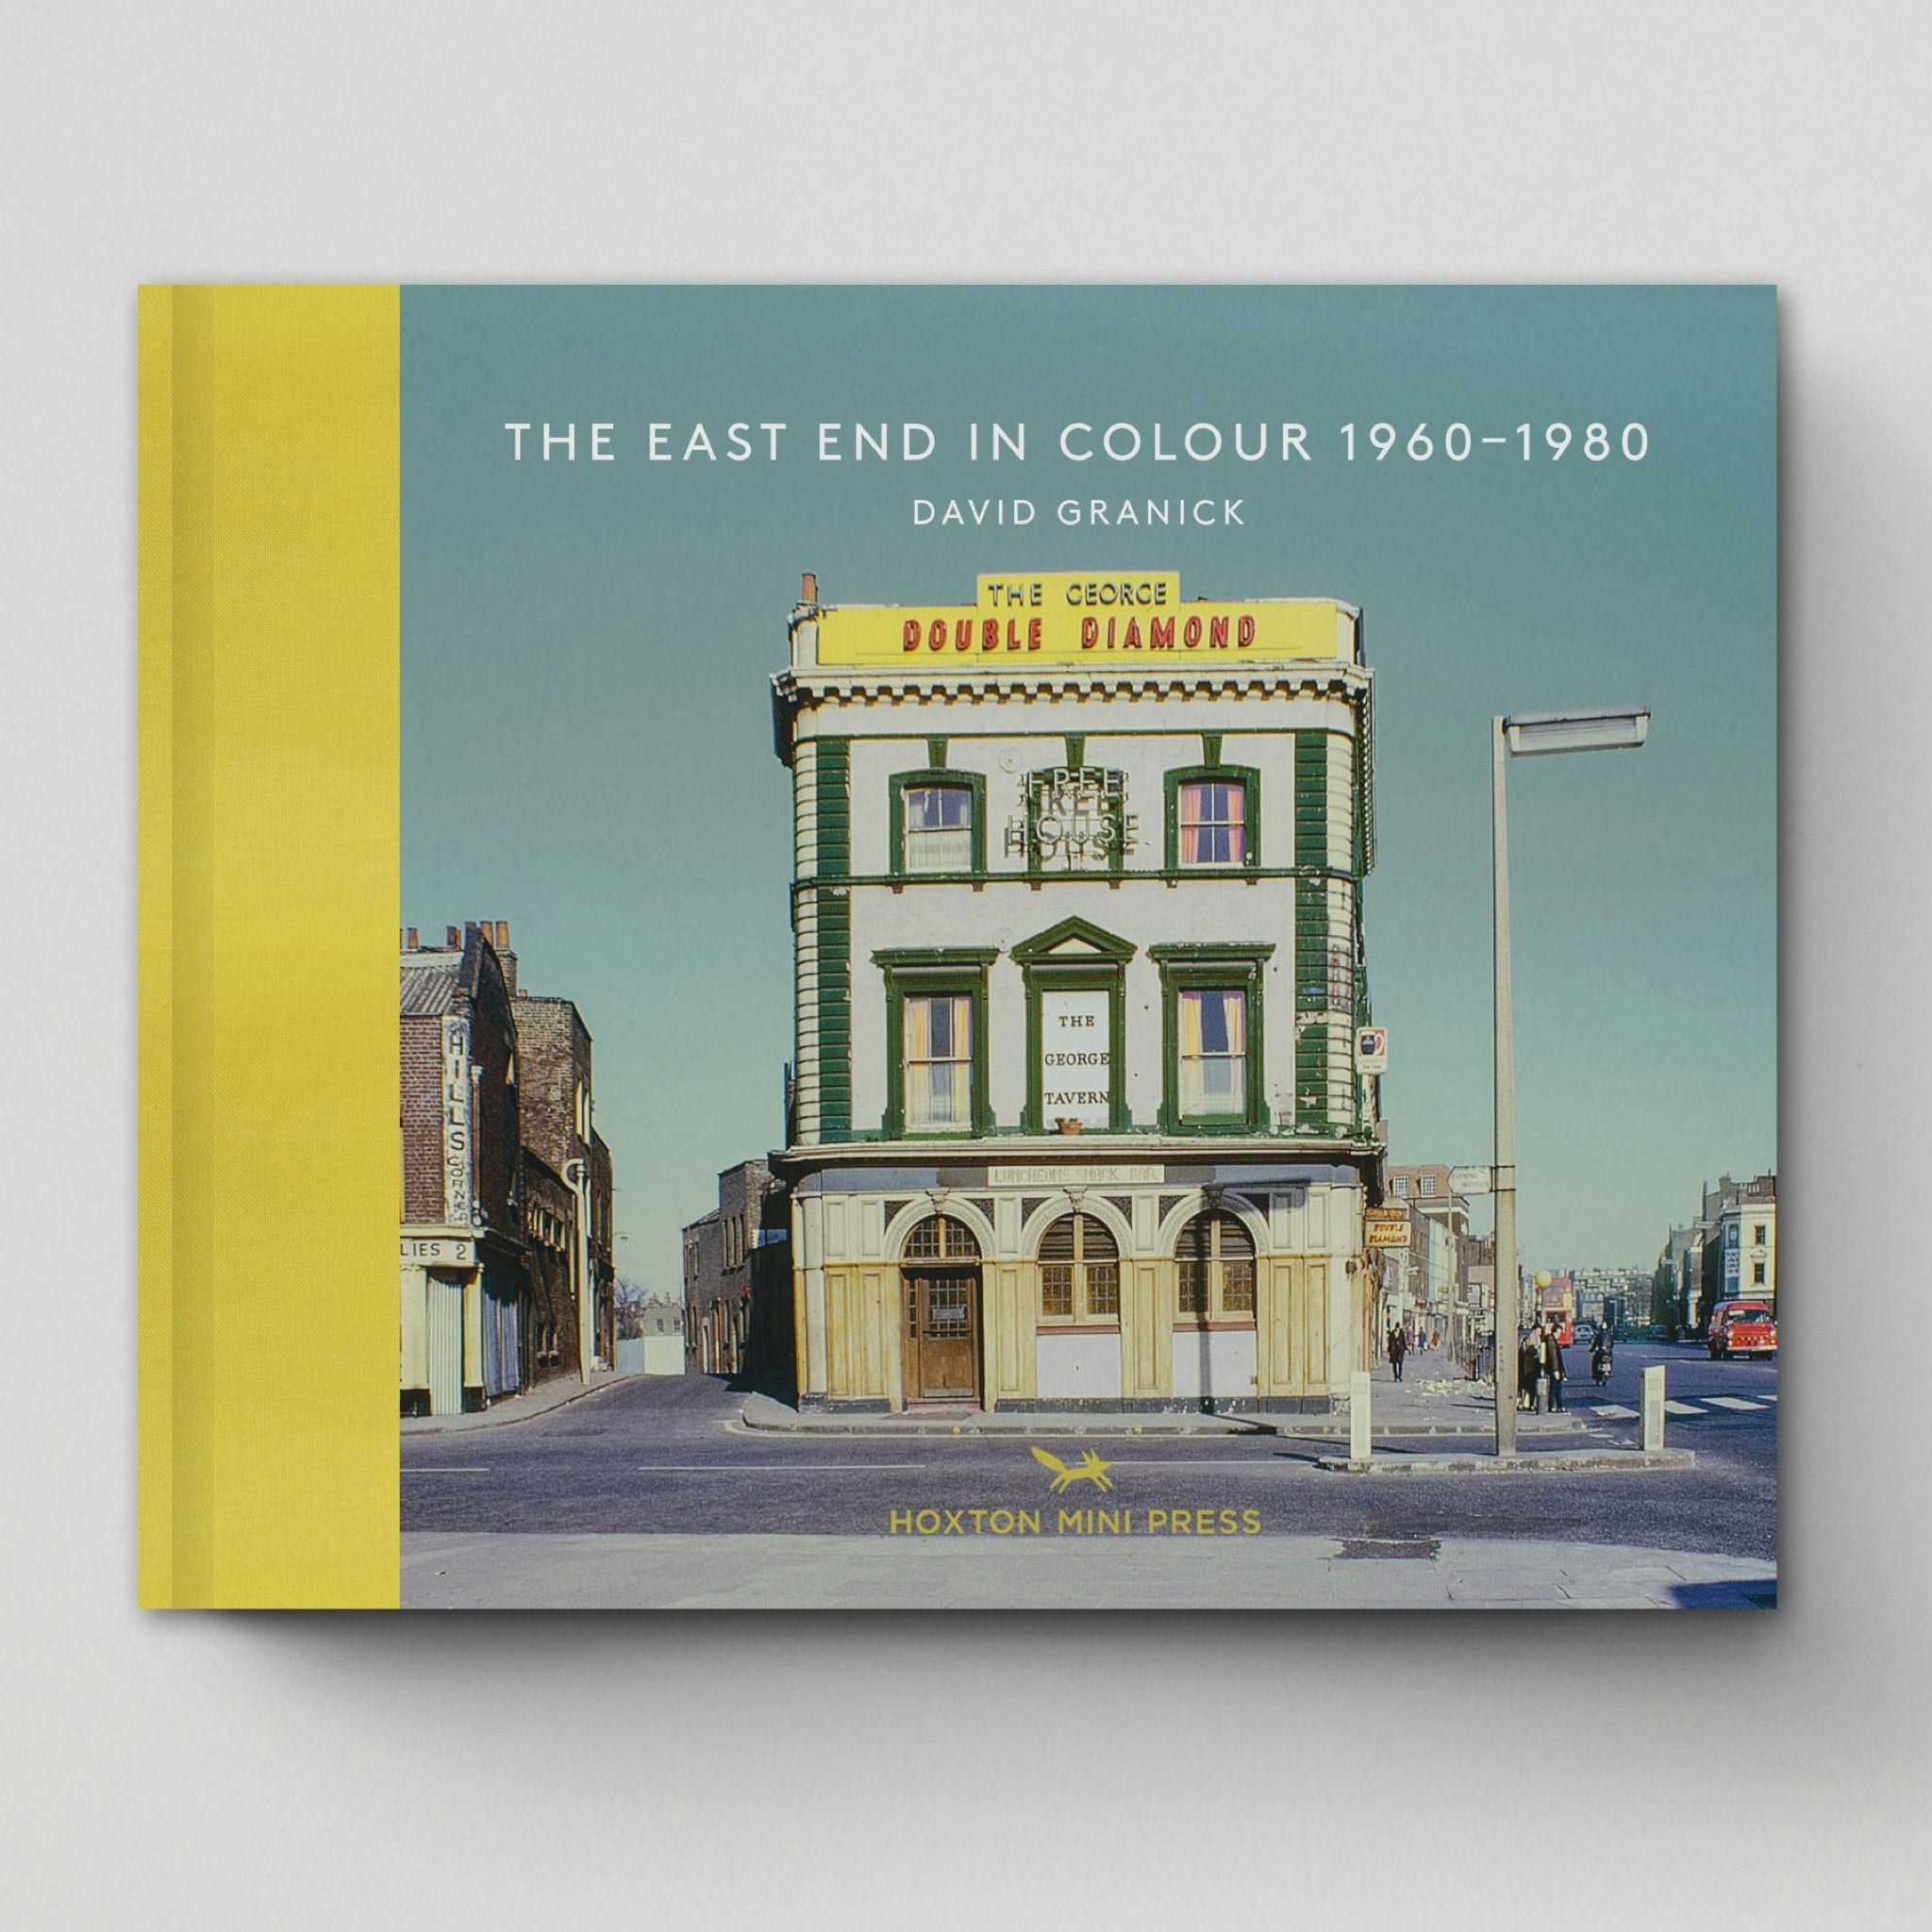 The East End in Colour 1960-1980 by Hoxton Mini Press